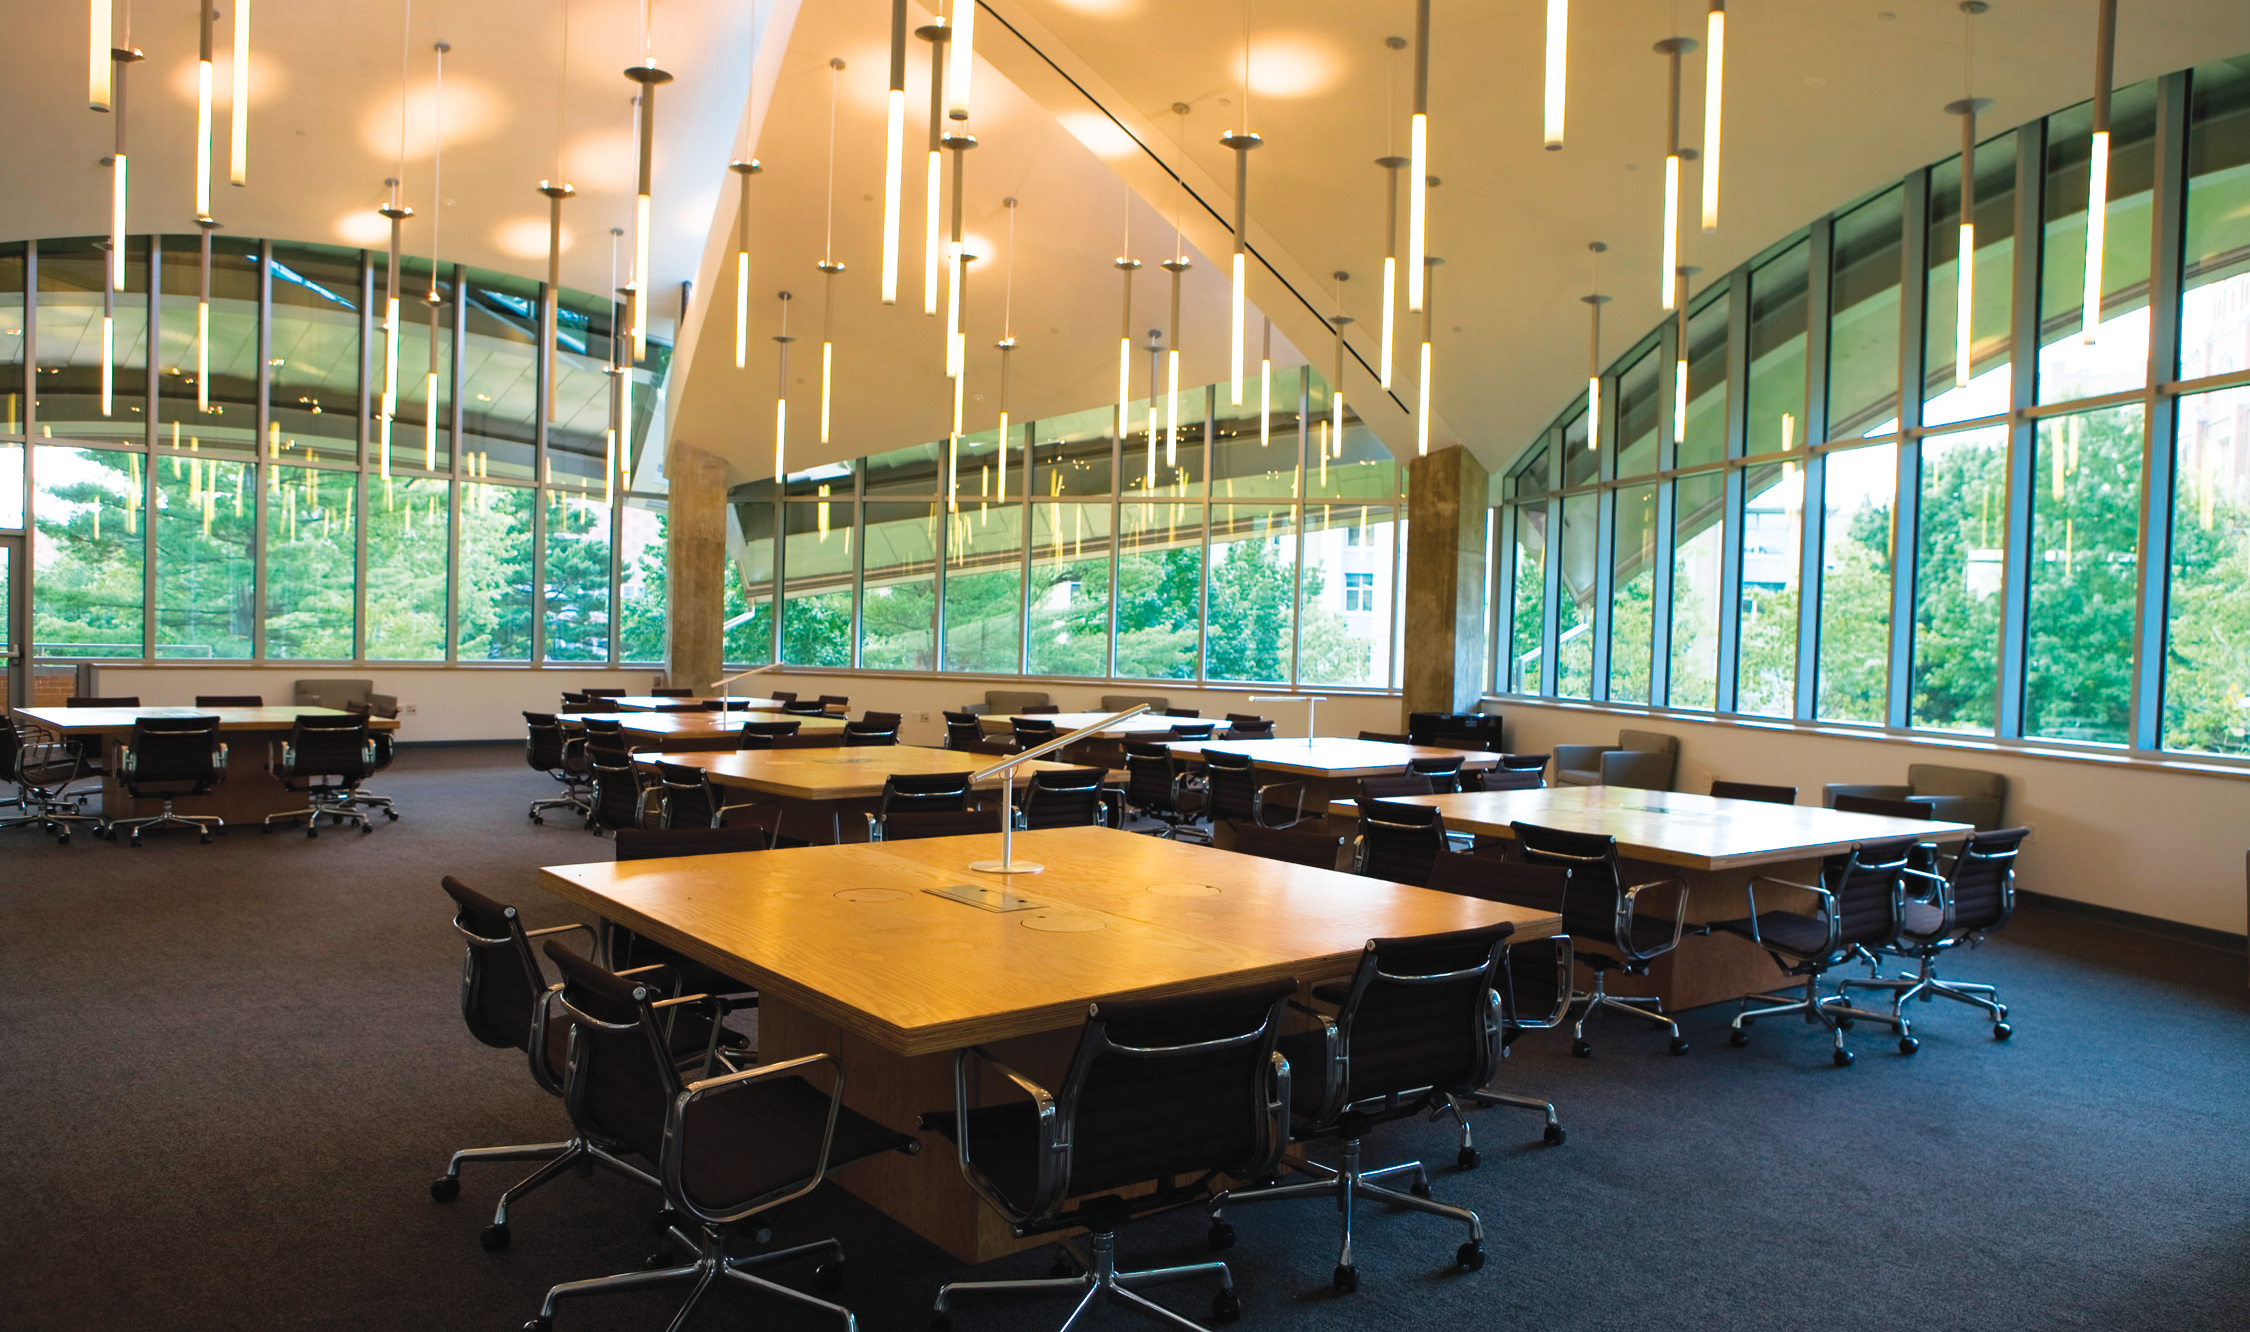 Custom light fixtures in an array of thin luminous tubes brings interest to a large, windowed classroom with group tables.